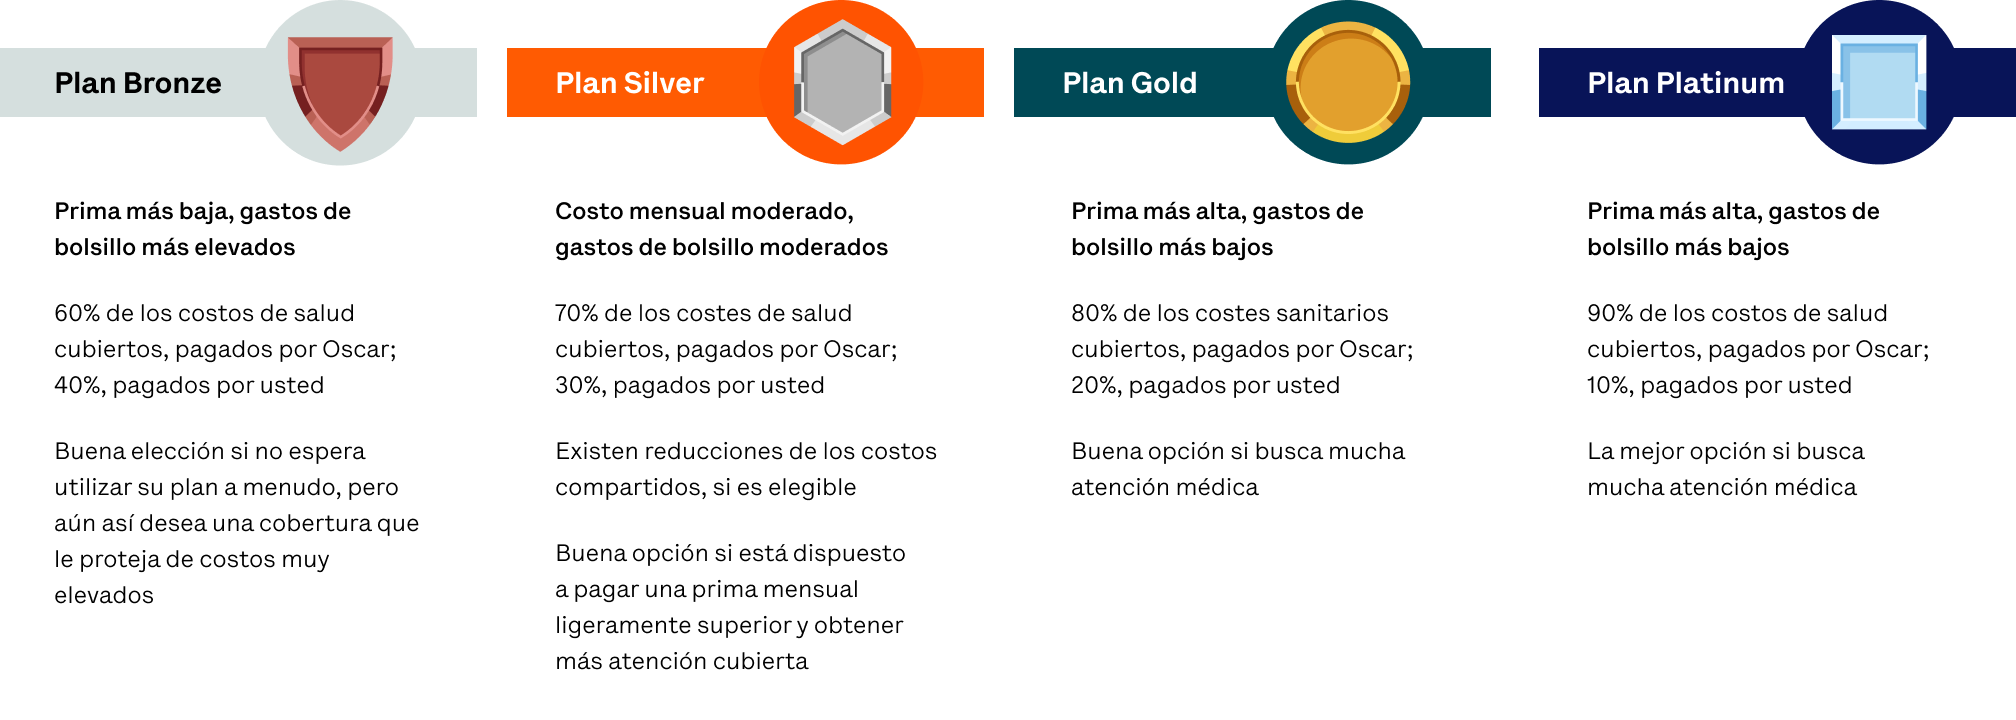 image of bronze, silver, gold, and platinum health plan metal tiers with details of each